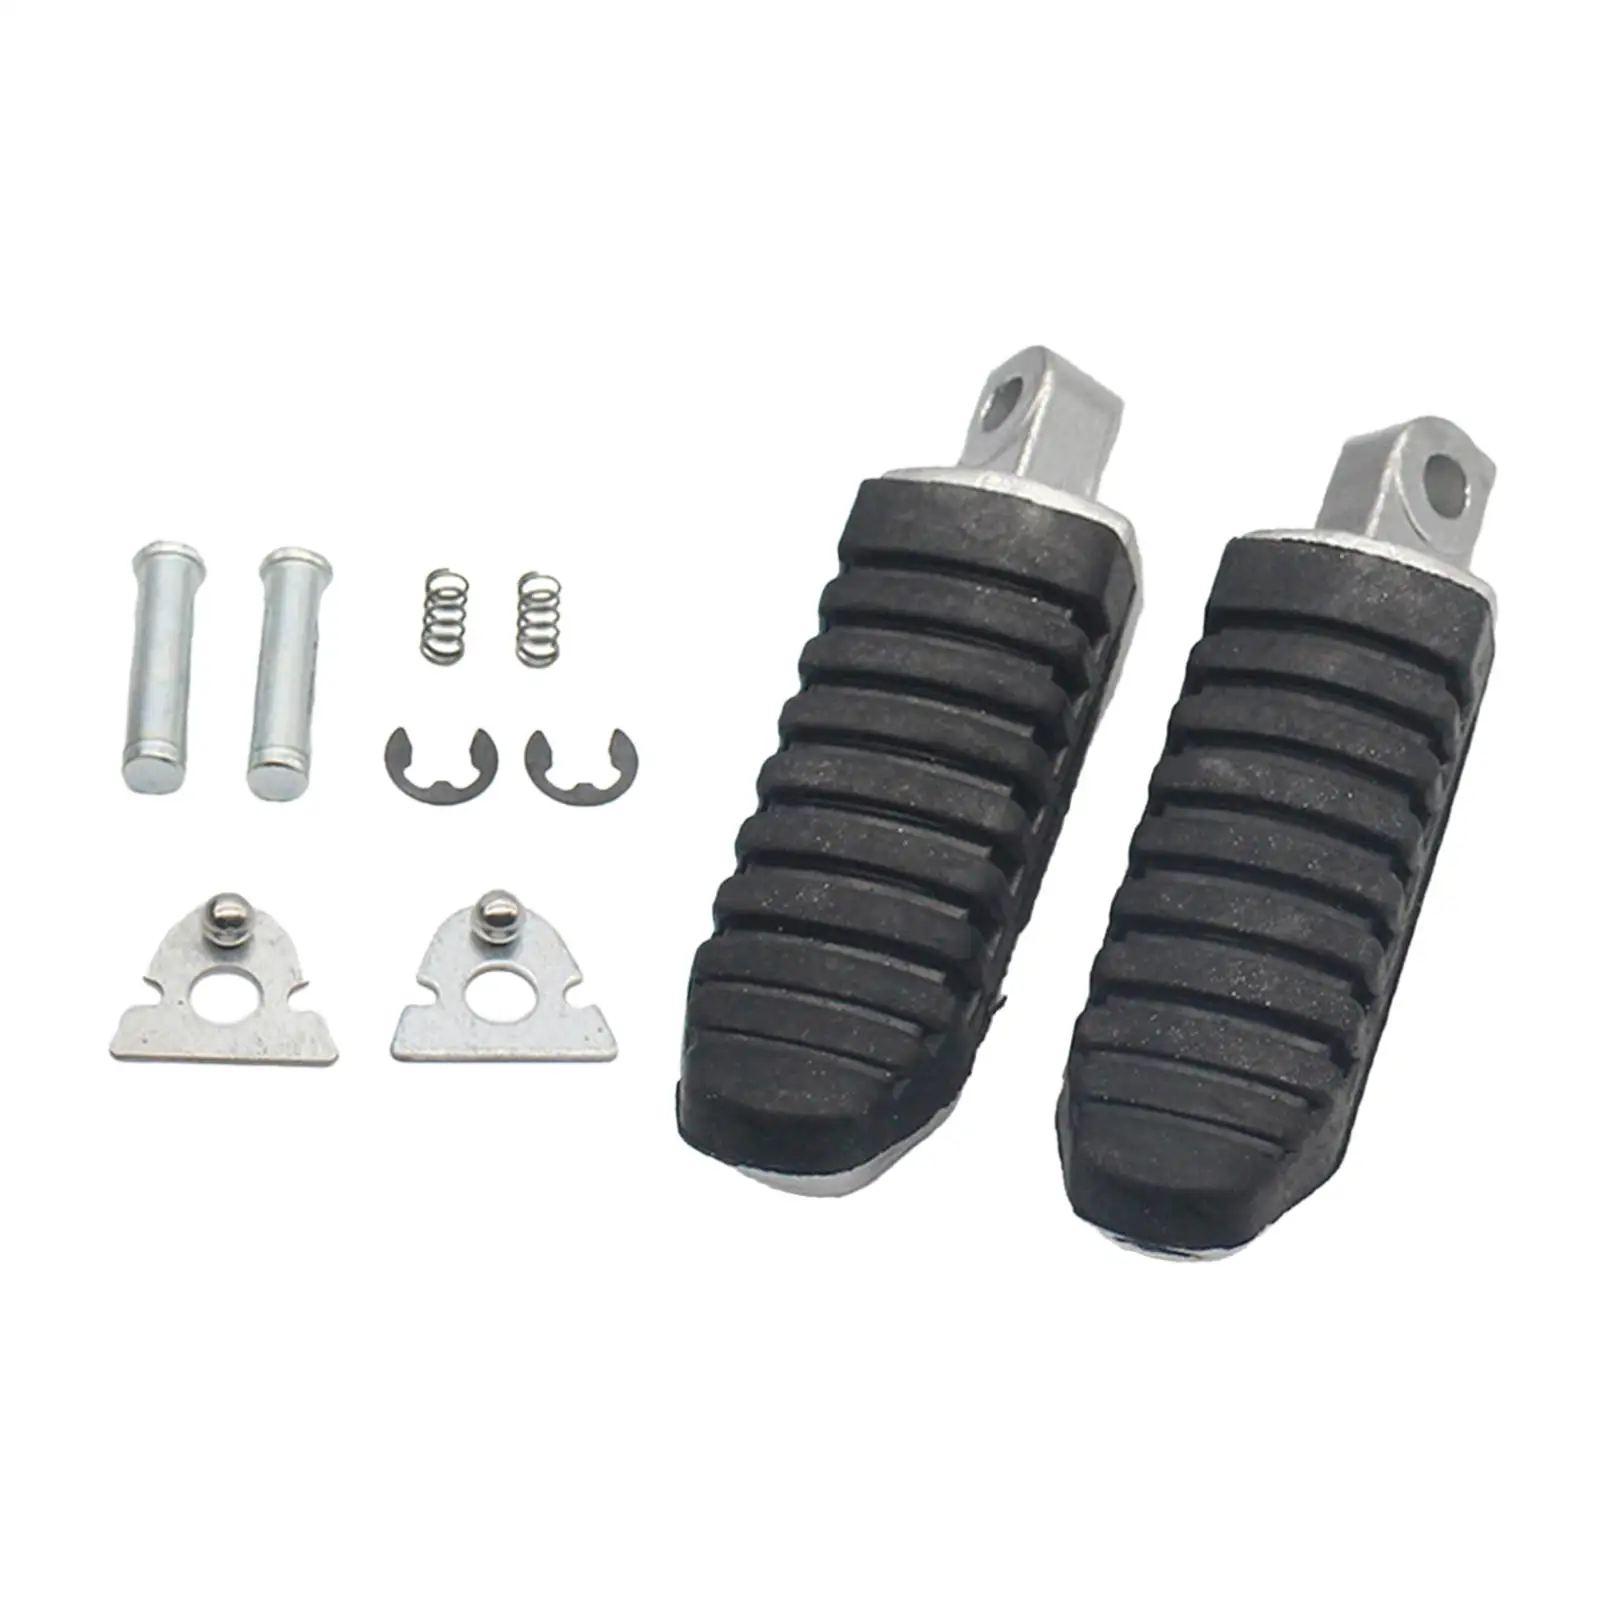 Aluminum Motorcycles Foot Pegs Foot Rest Pedals for Suzuki 650F, Motorcycle